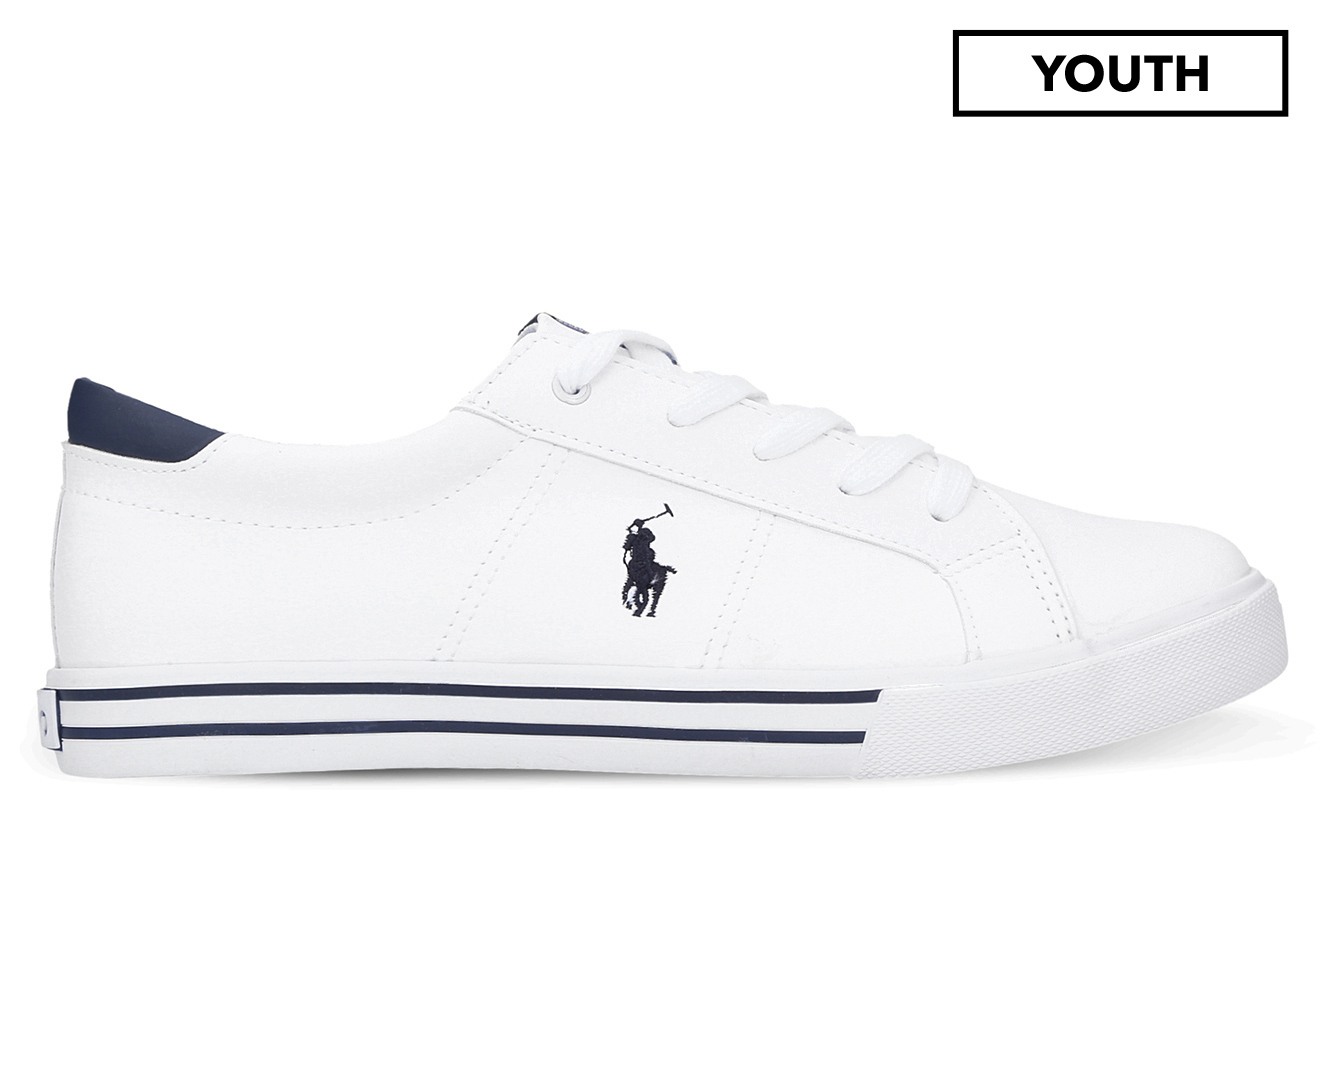 Polo Ralph Lauren Youth Boys' Evanston Sneakers - White/Navy | Catch.co.nz